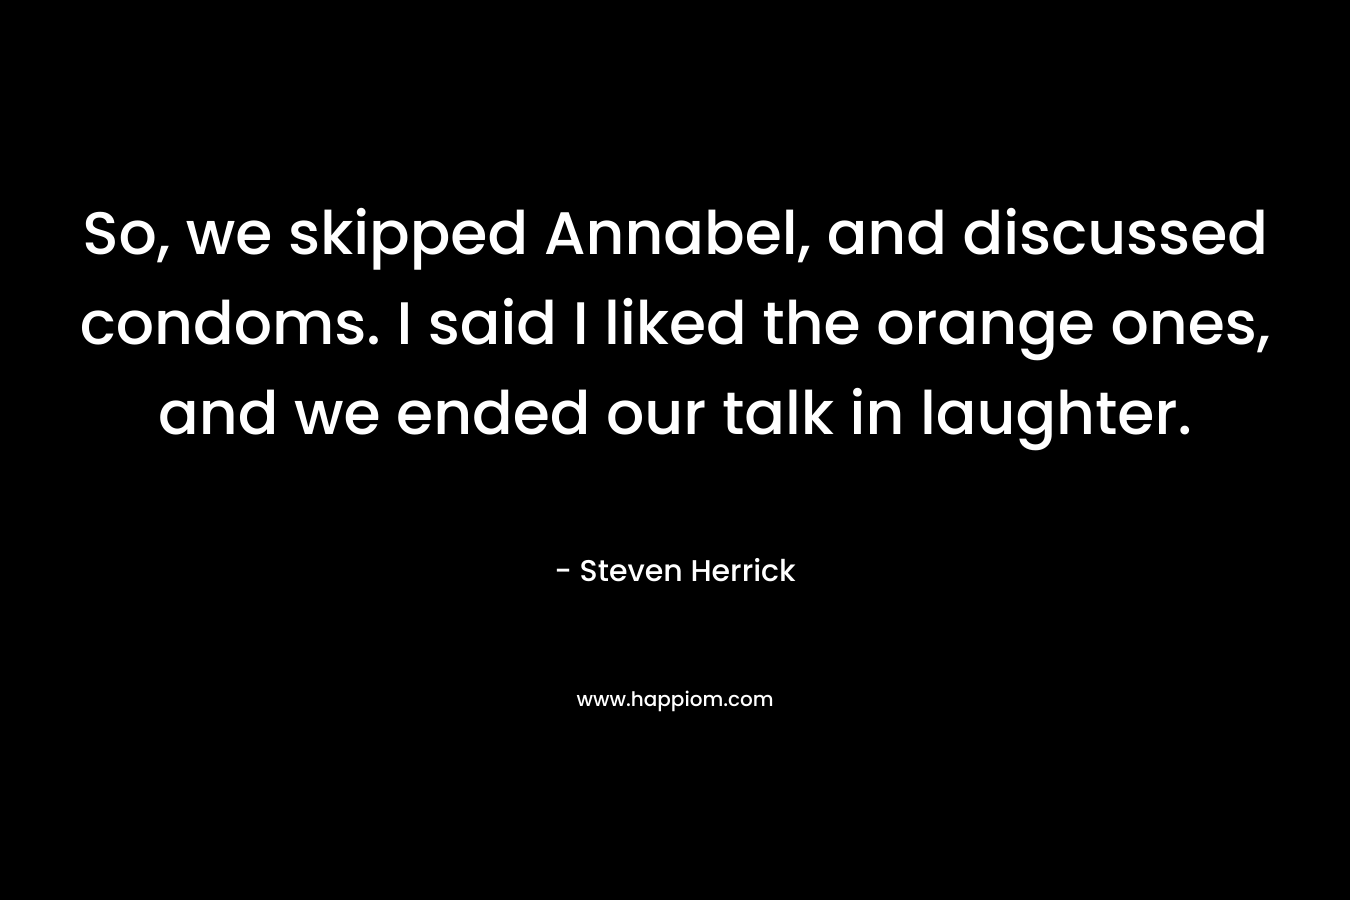 So, we skipped Annabel, and discussed condoms. I said I liked the orange ones, and we ended our talk in laughter. – Steven Herrick